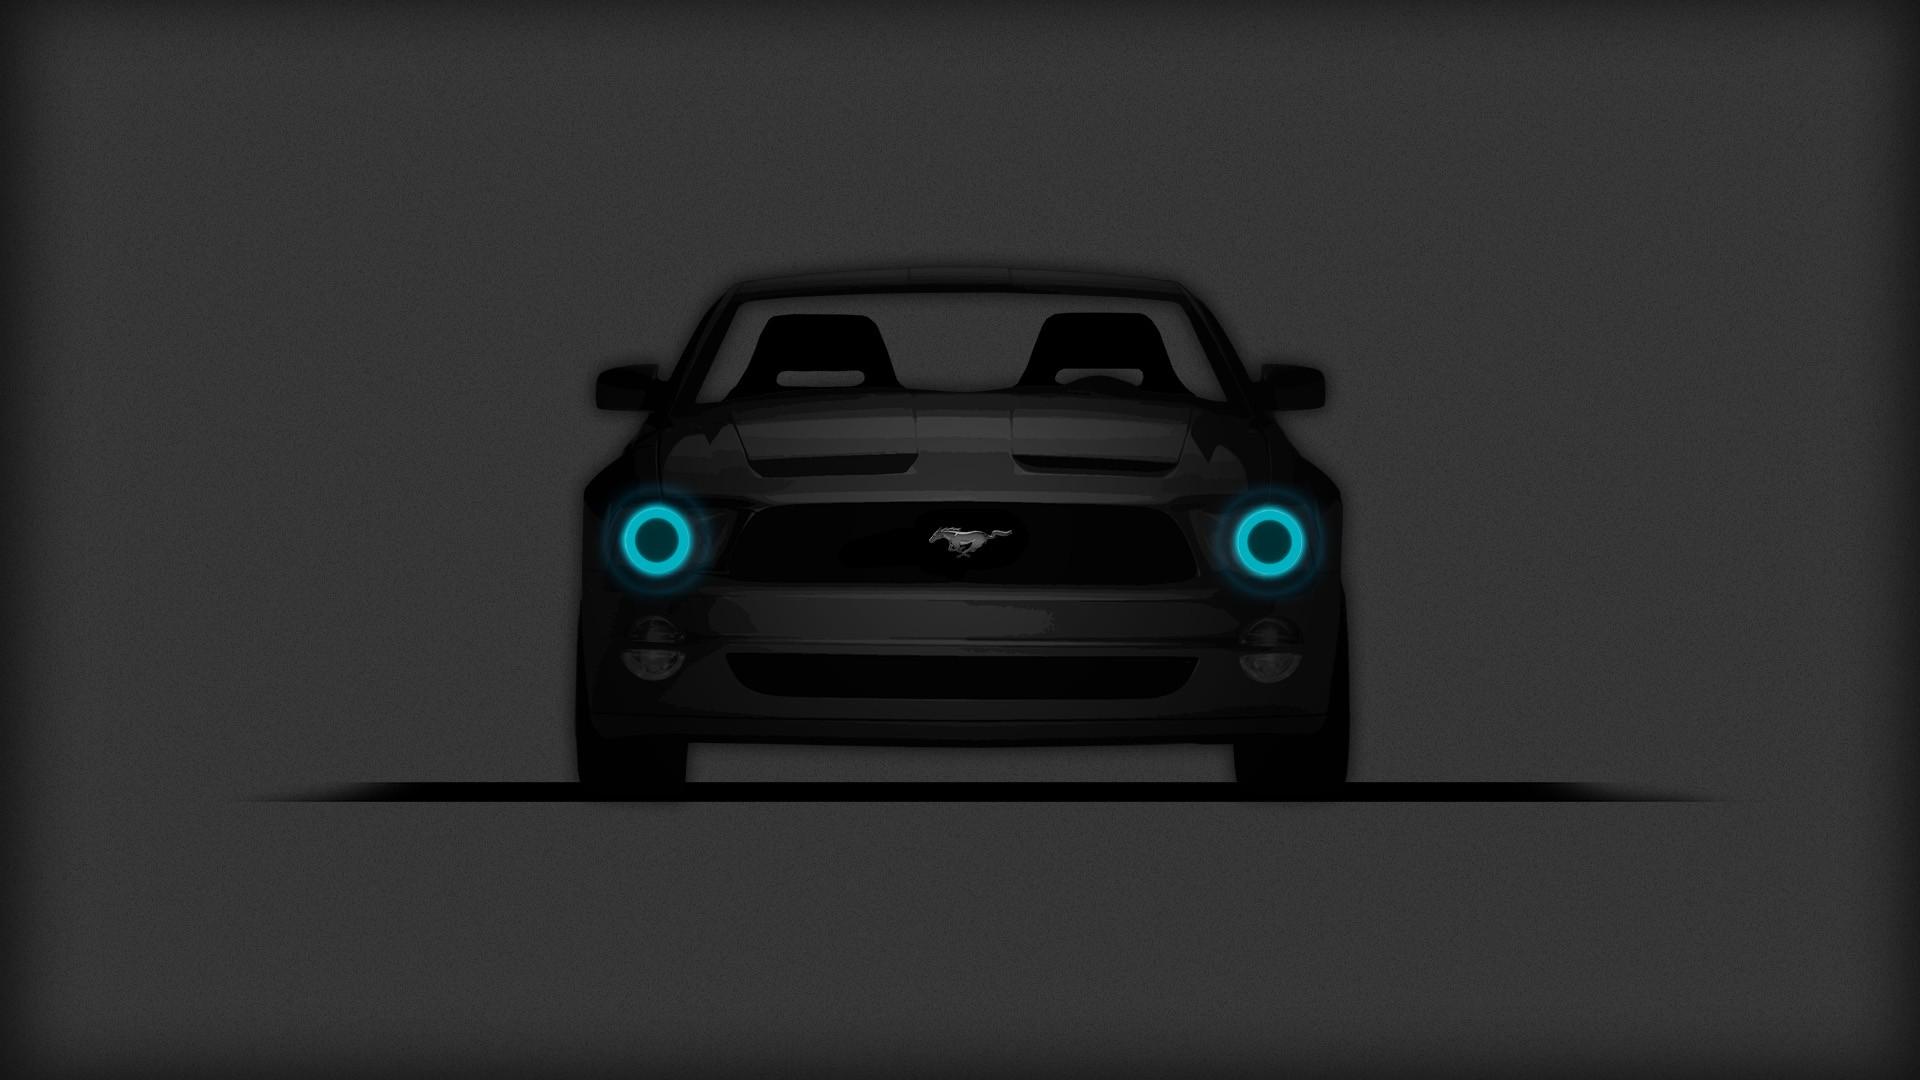 Ford Mustang, Ford Mustang GT, Car, Minimalism, Muscle Cars Wallpaper HD / Desktop and Mobile Background